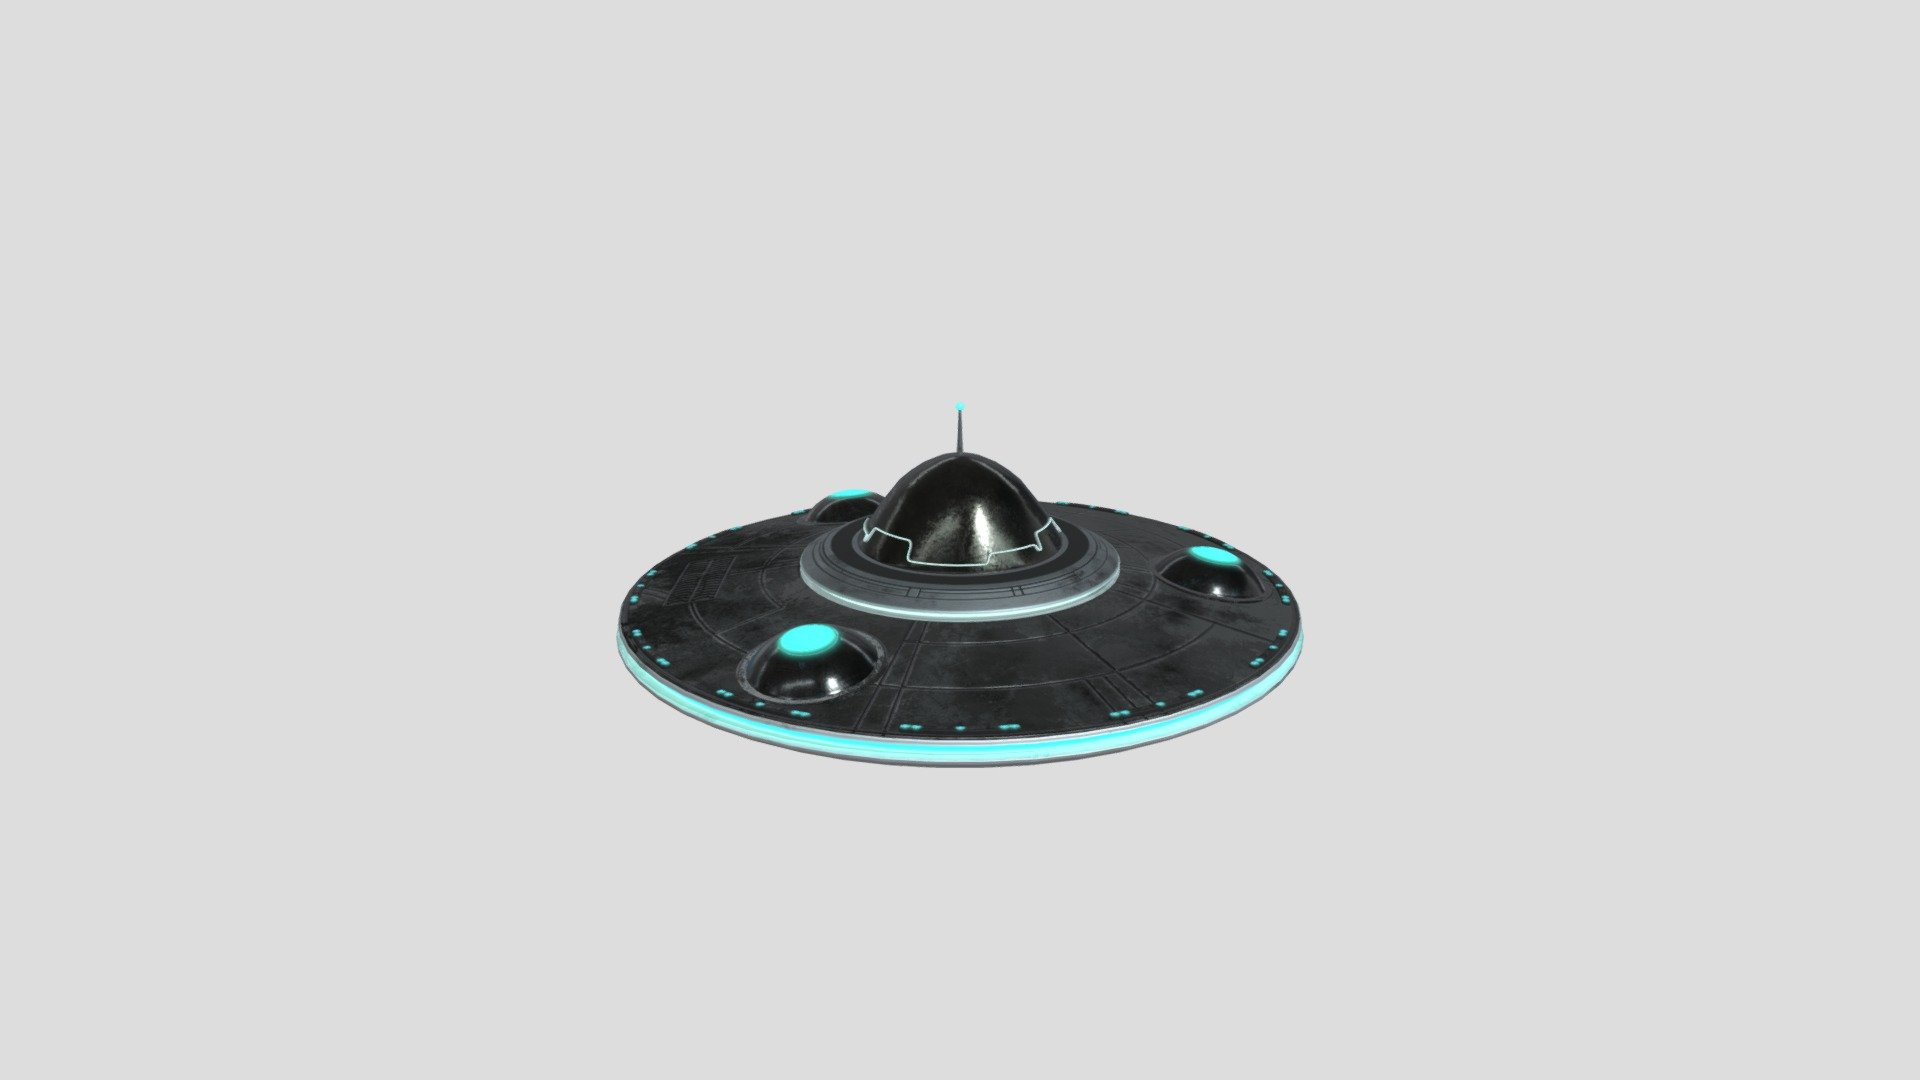 THIS IS A 3D MODEL OF A UFO - Retro UFO - Download Free 3D model by fudailshajahan 3d model